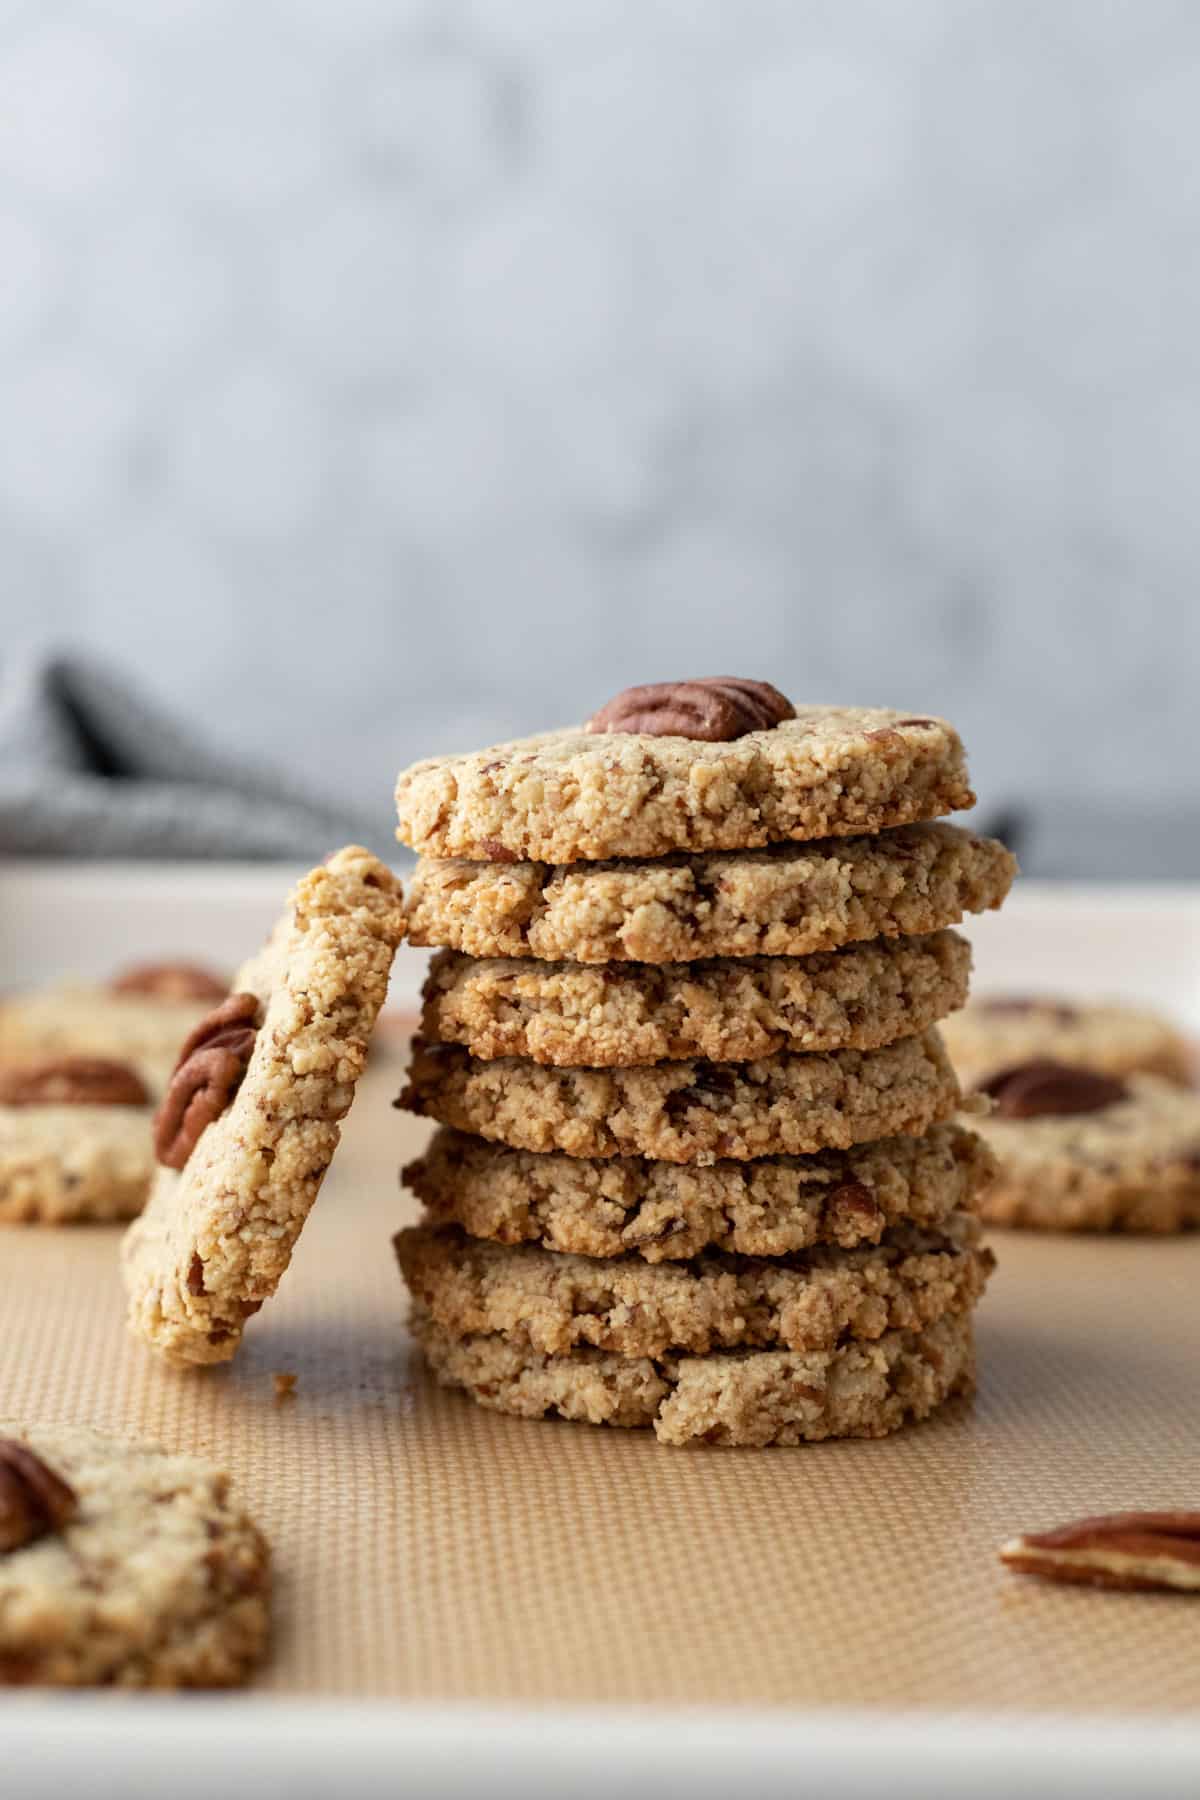 a tall stack of cookies showing the nutty, rustic, and crisp textured edges.